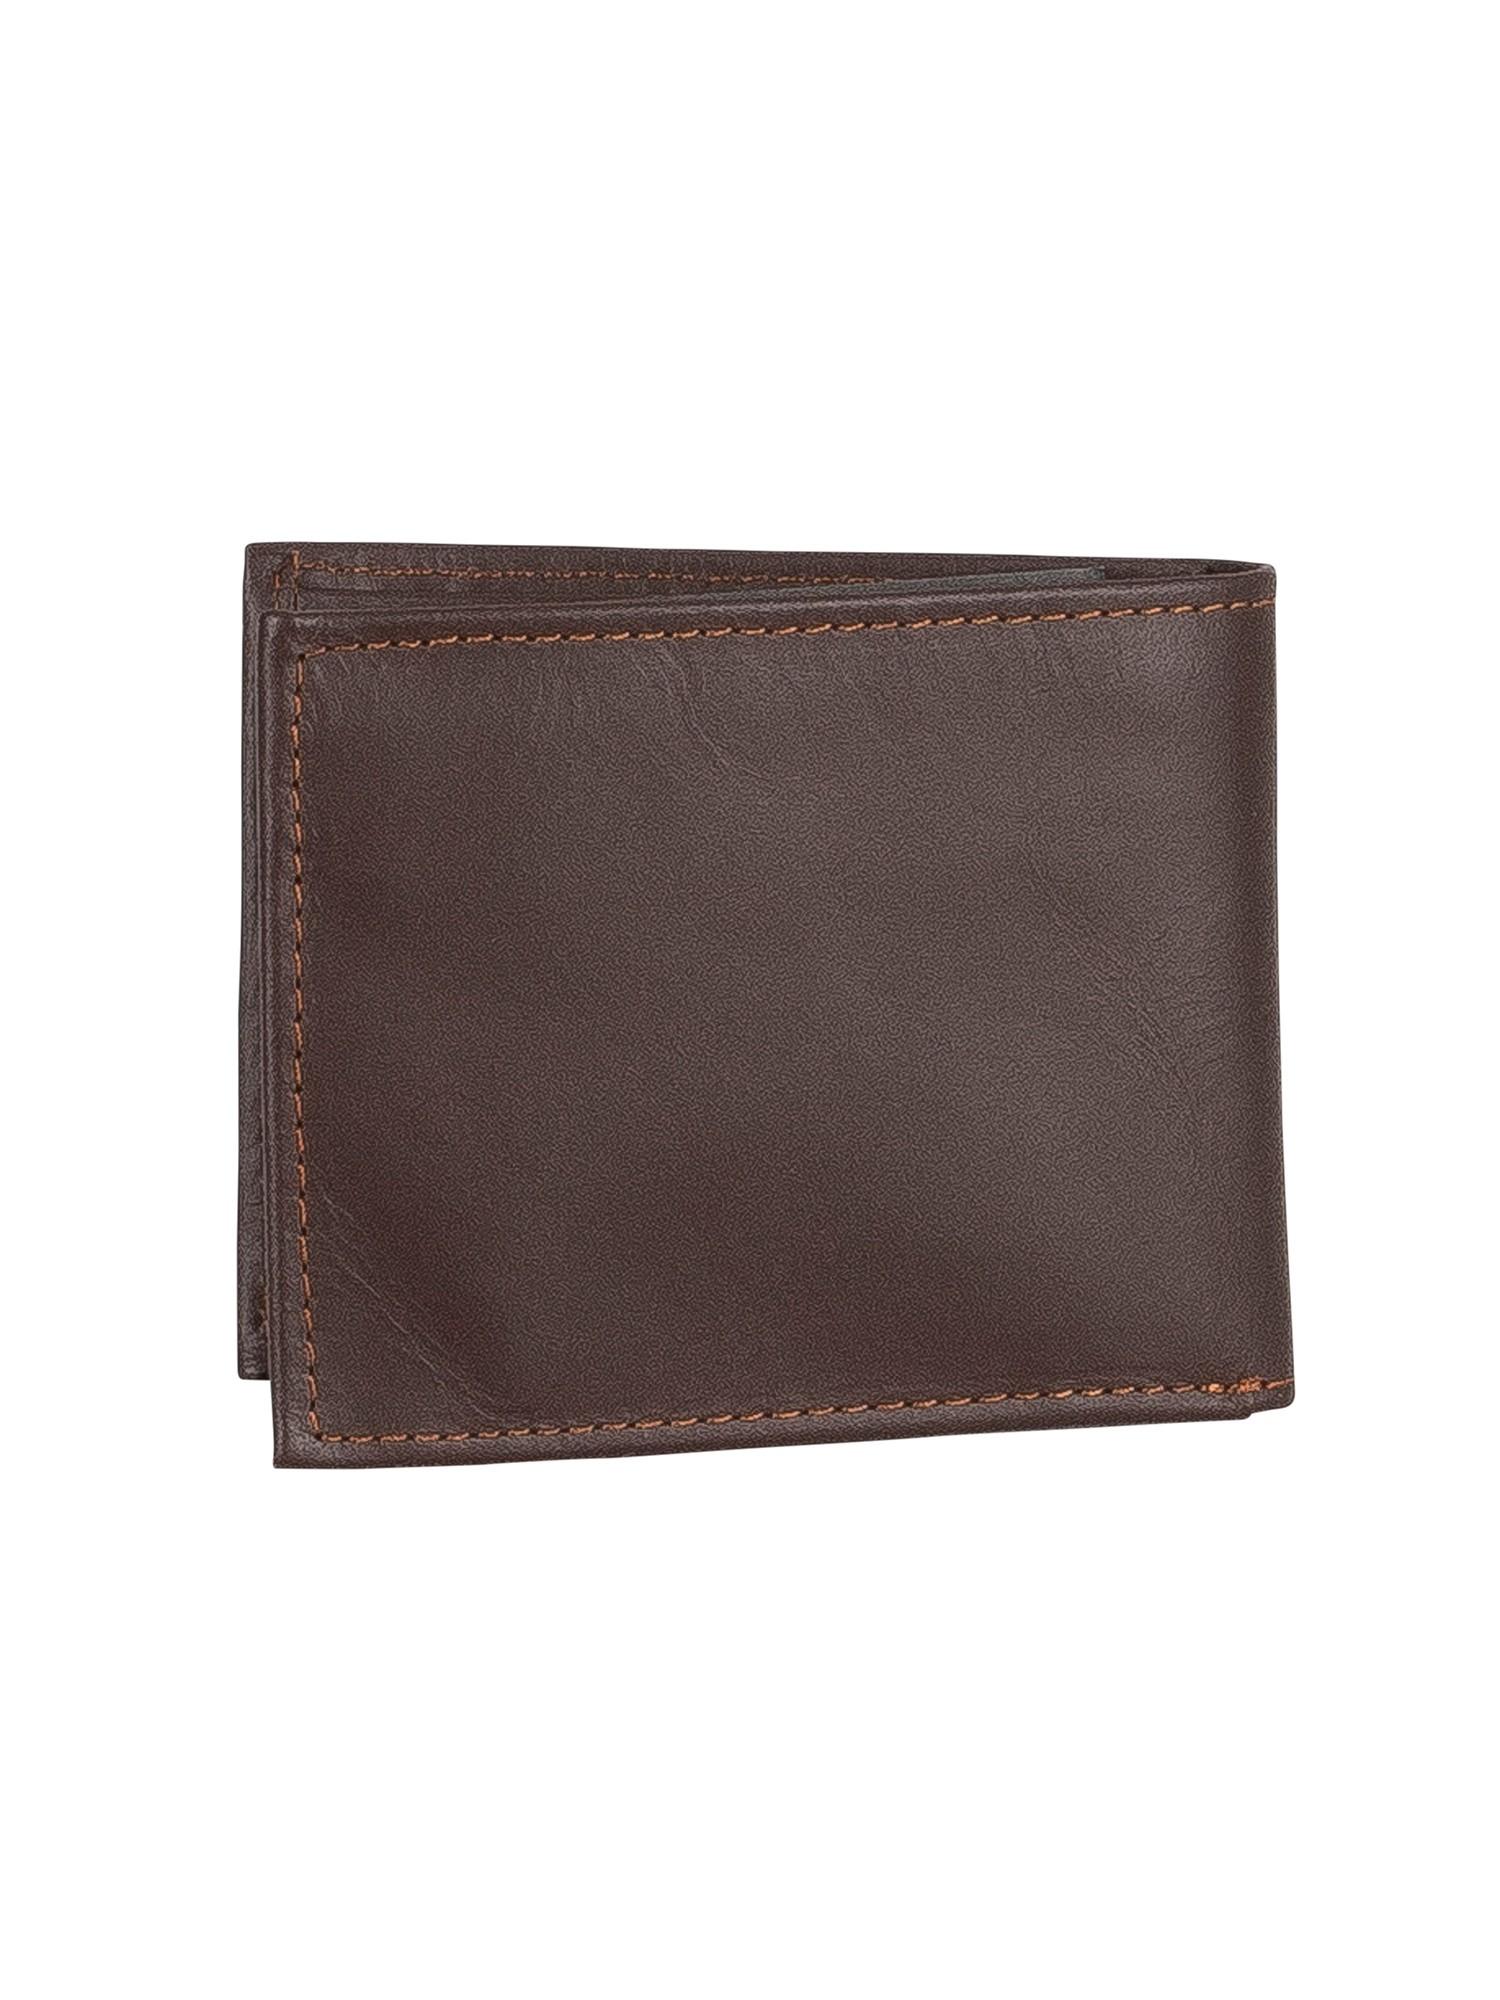 WOODLAND/Levi's/CAT Genuine Leather Wallet For Men at Rs 155 in Navi Mumbai